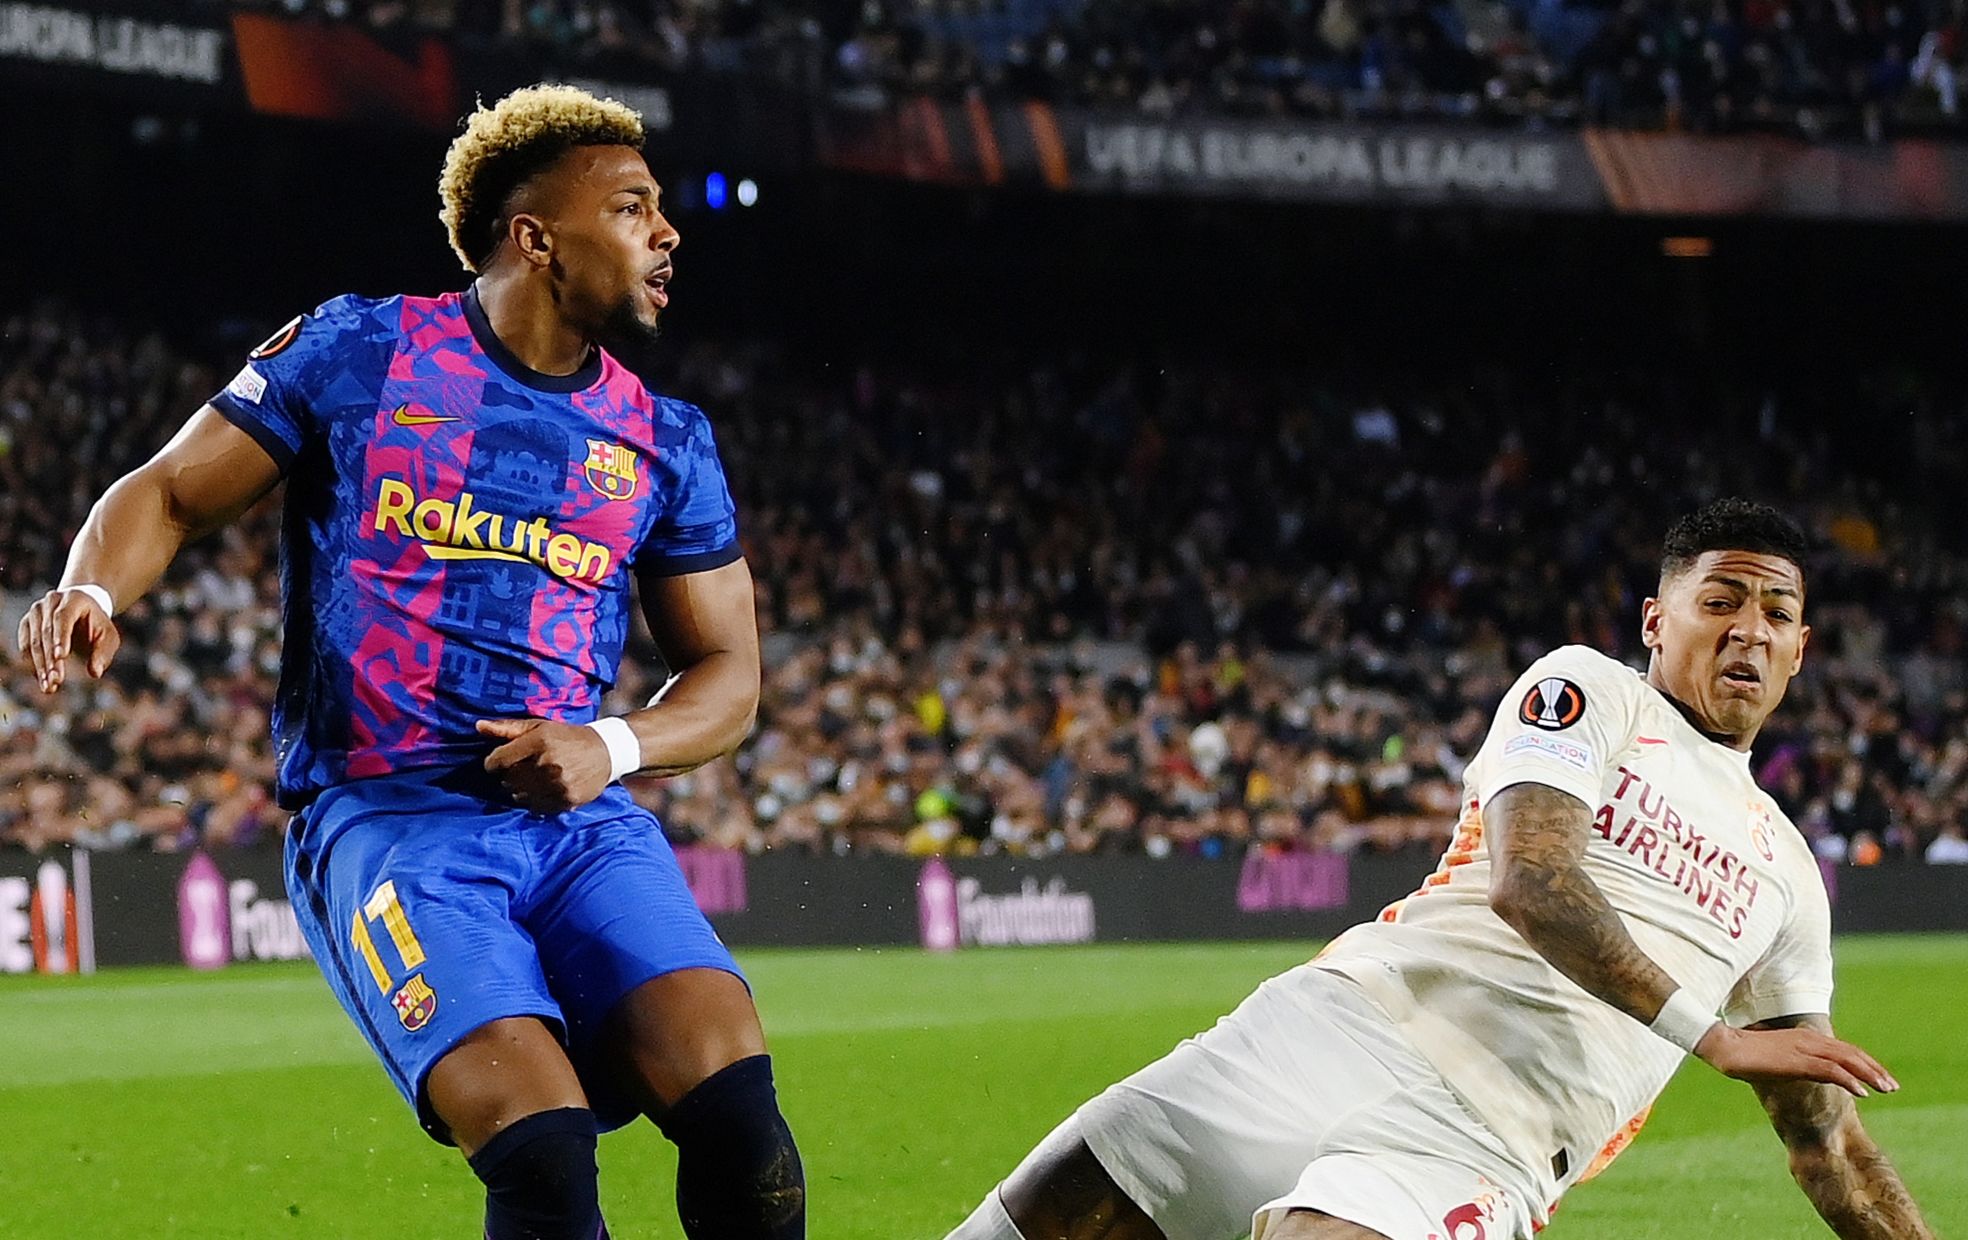 Galatasaray - FC Barcelona Bets, Odds and Lineups for the UEFA Europa League Round of 16 second leg | March 17